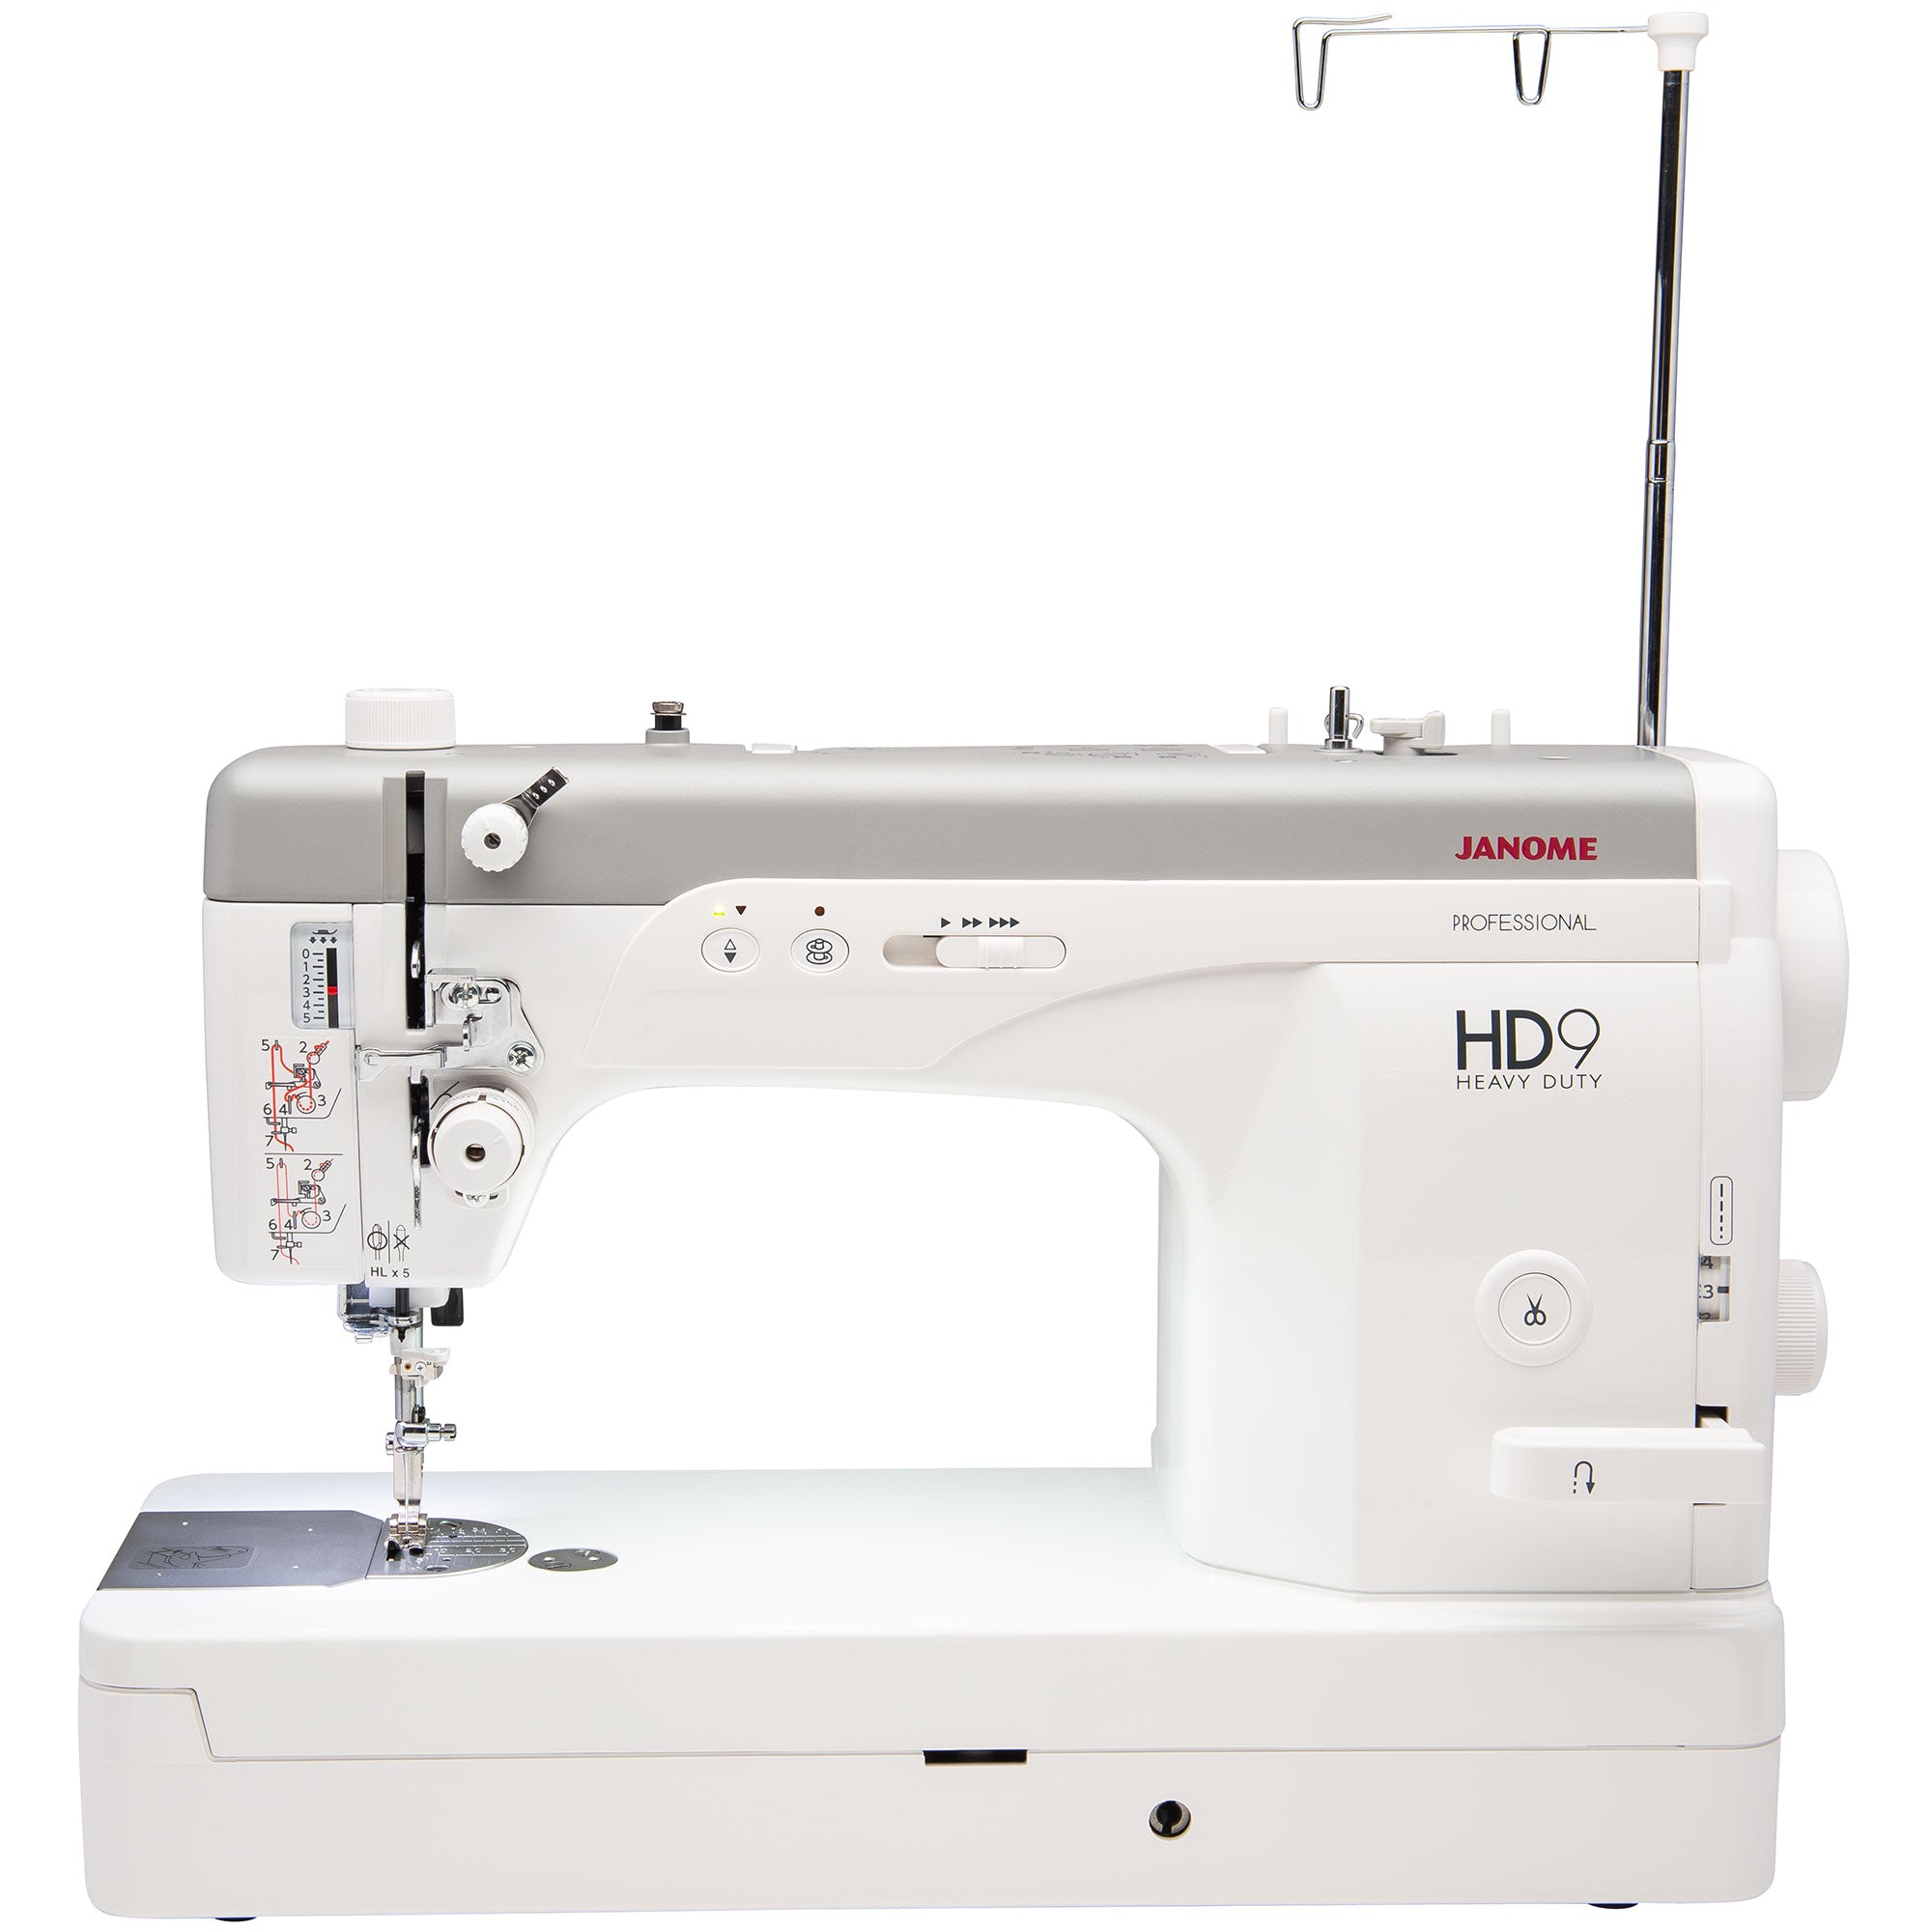 front facing image of the Janome HD9 Sewing Machine with attachement